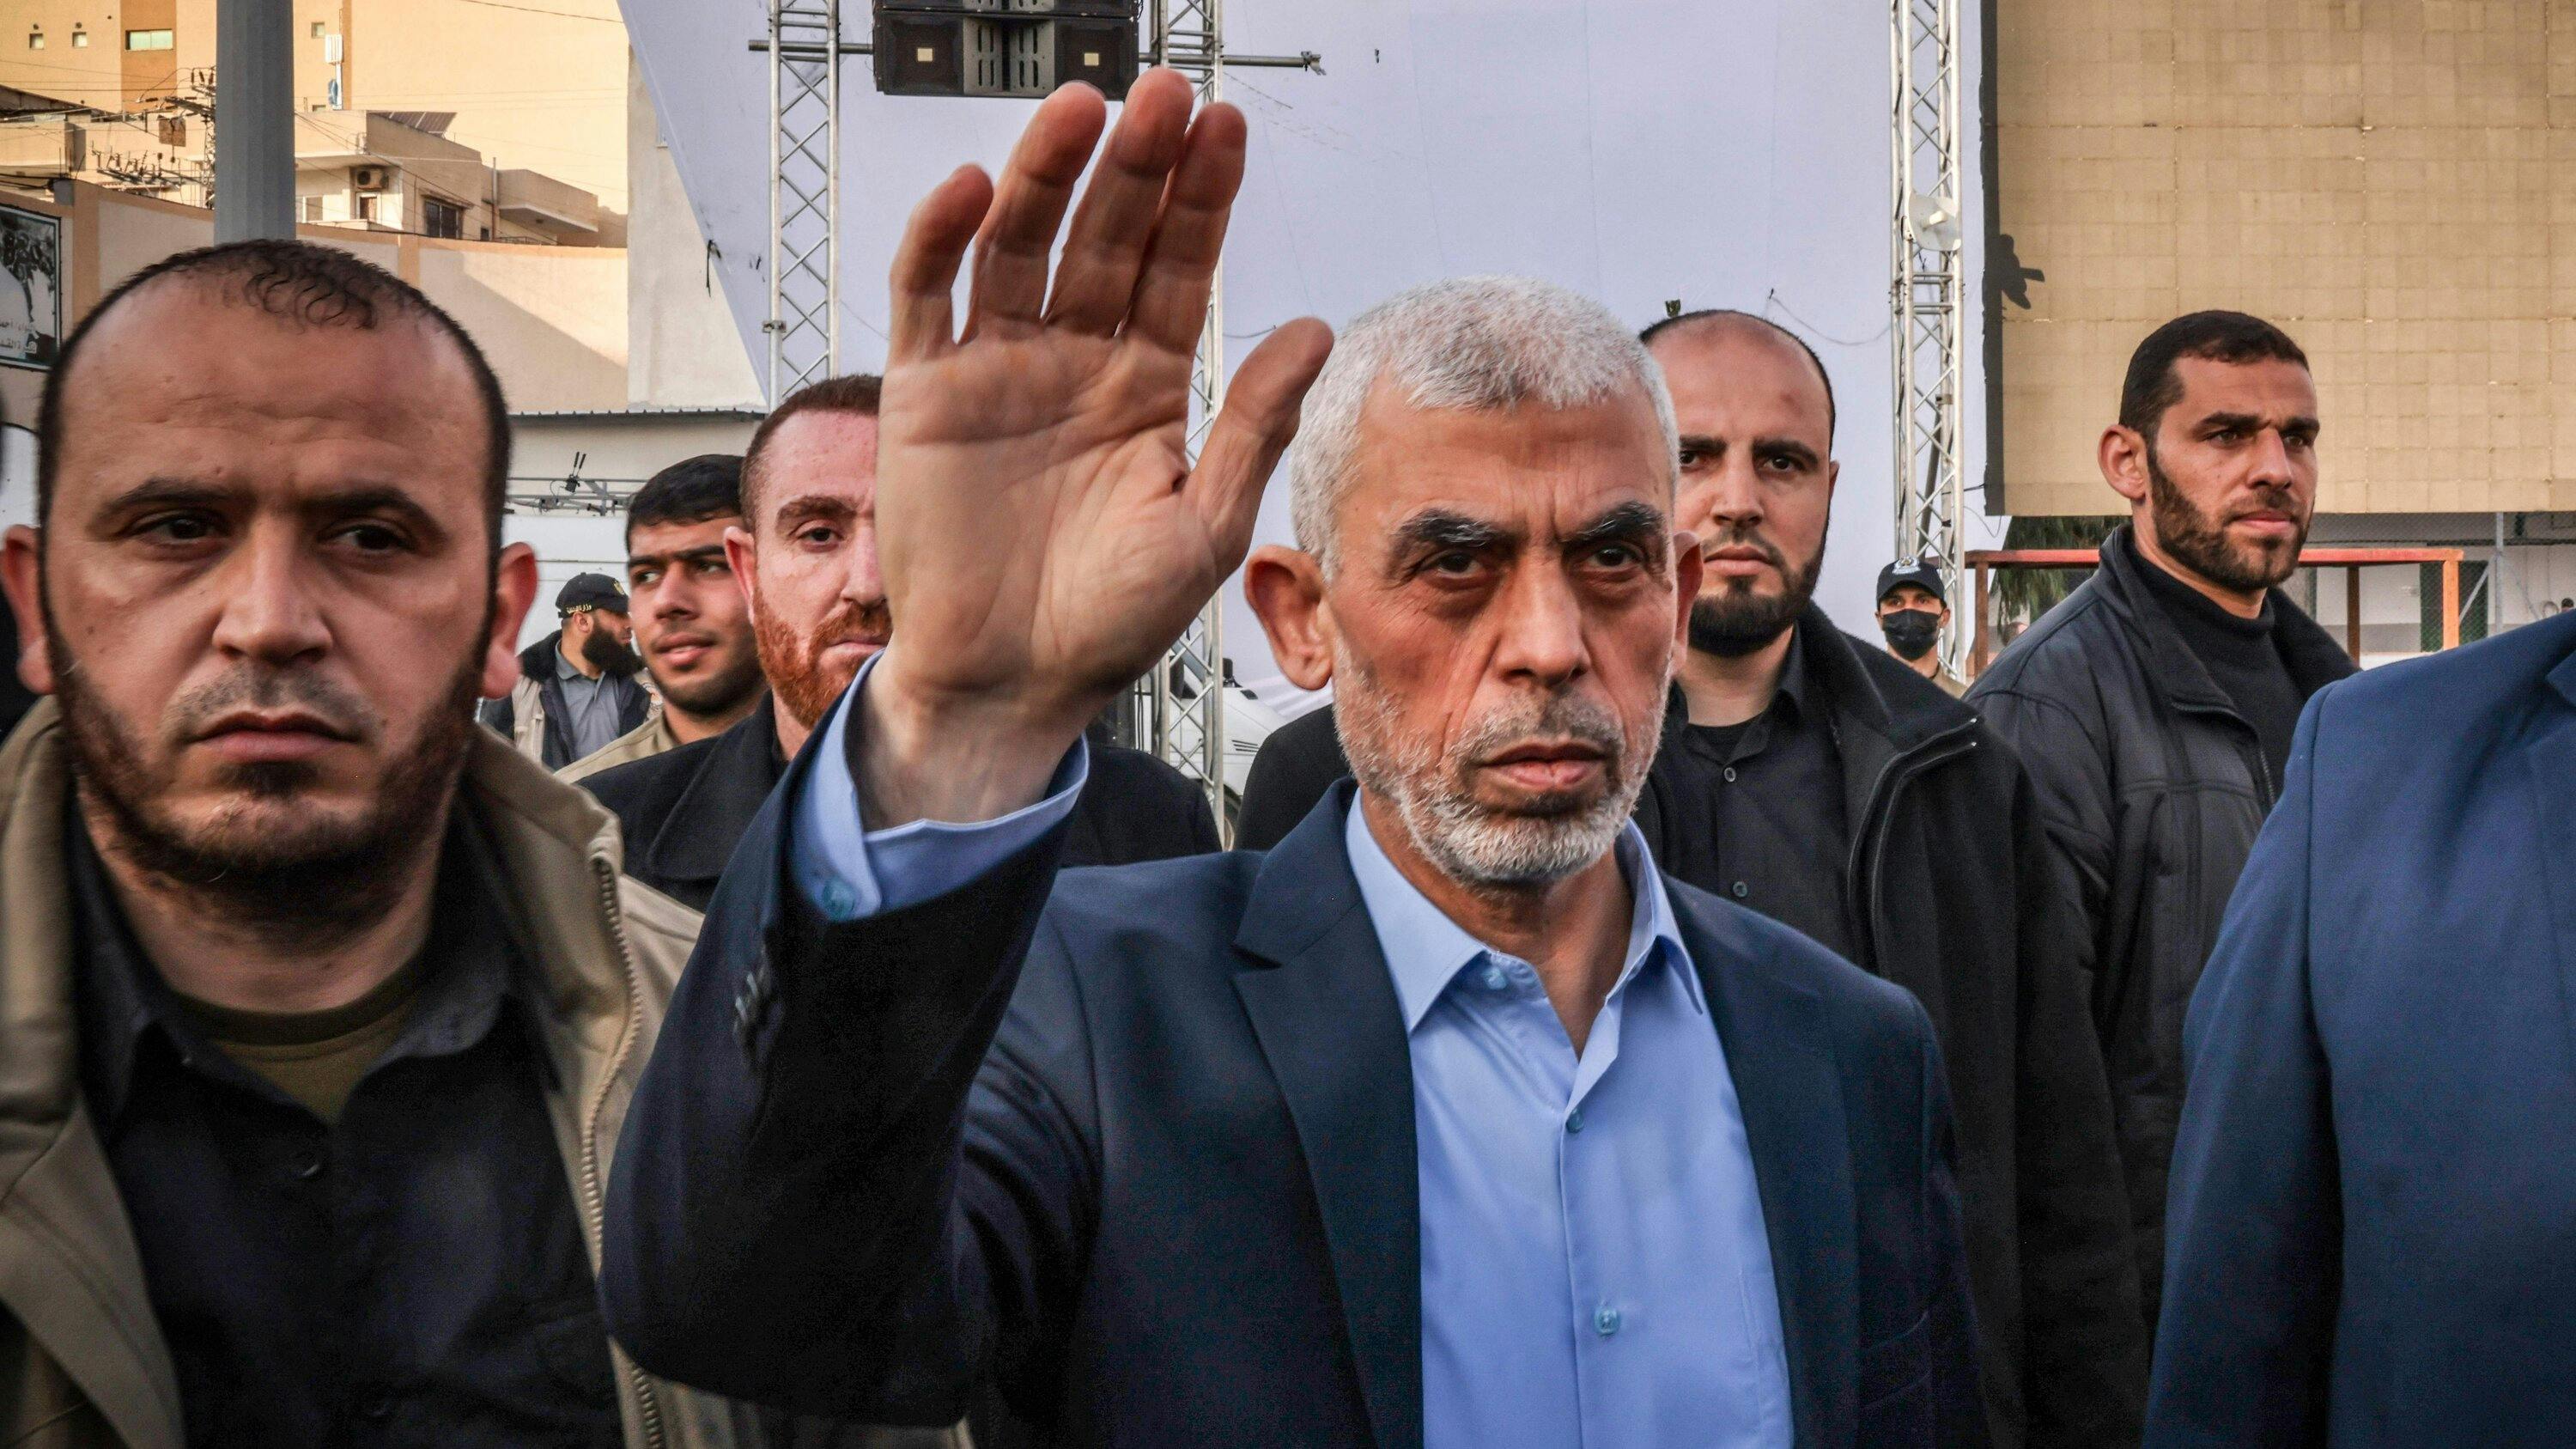 Hamas, Led by Yahya Sinwar, Used Secret Police to Suppress Dissent in Gaza